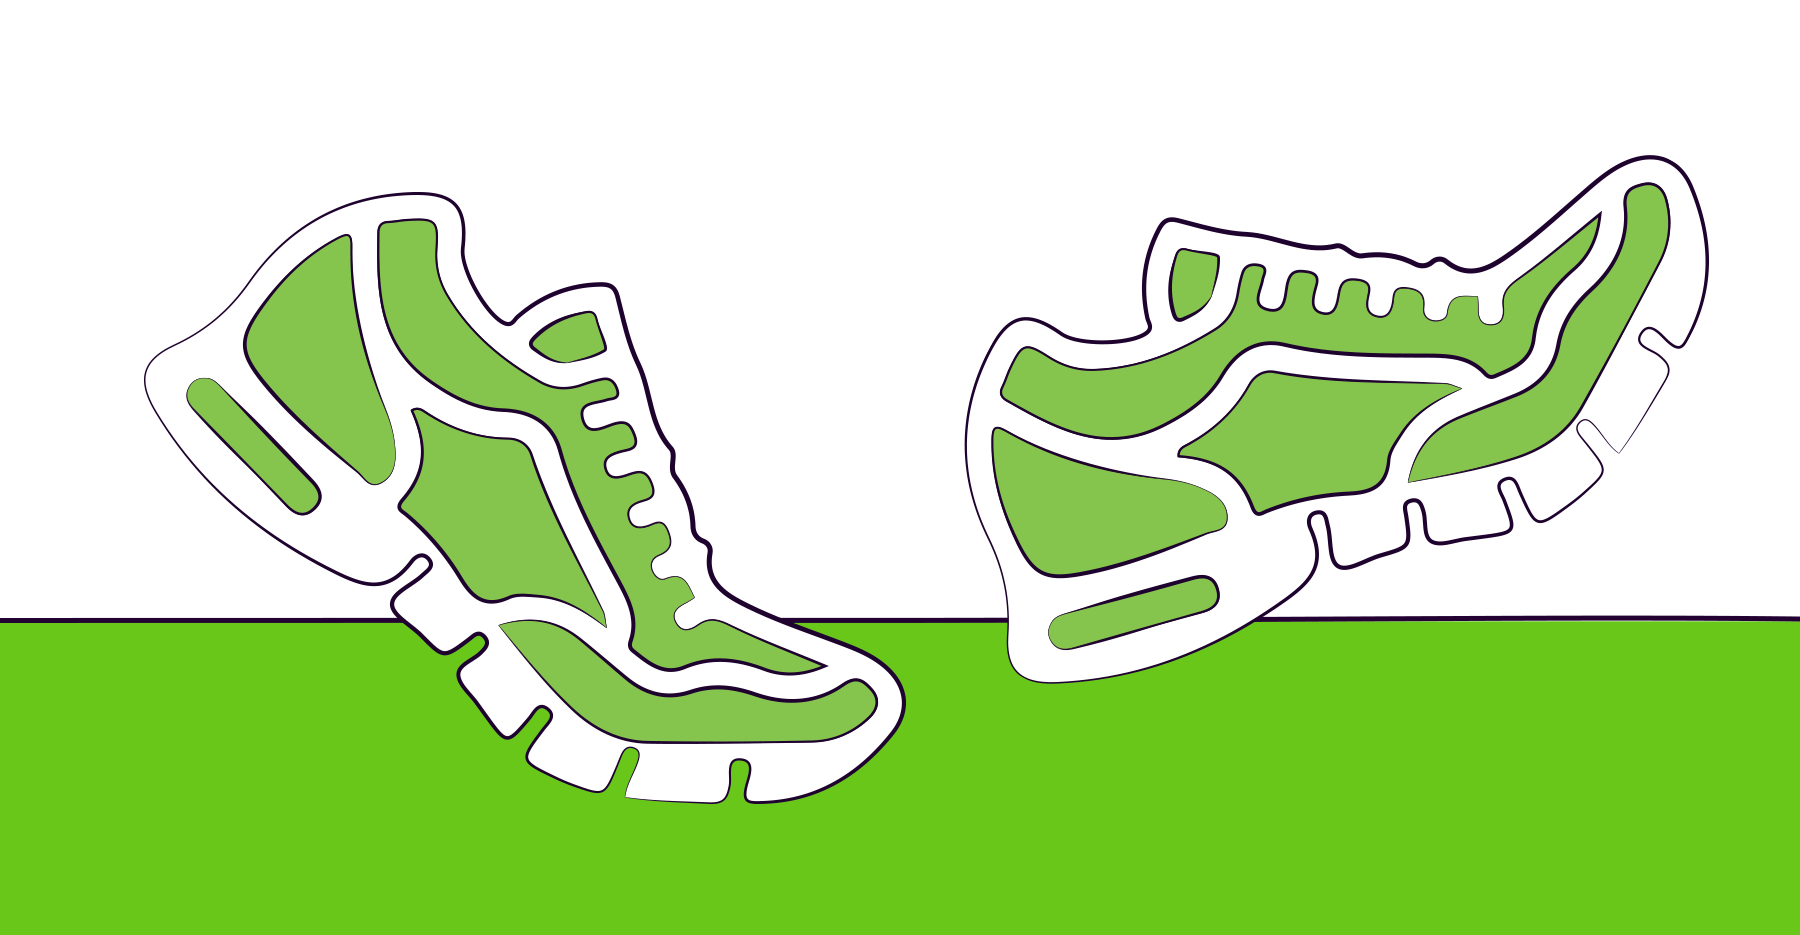 An illustration of green running shoes